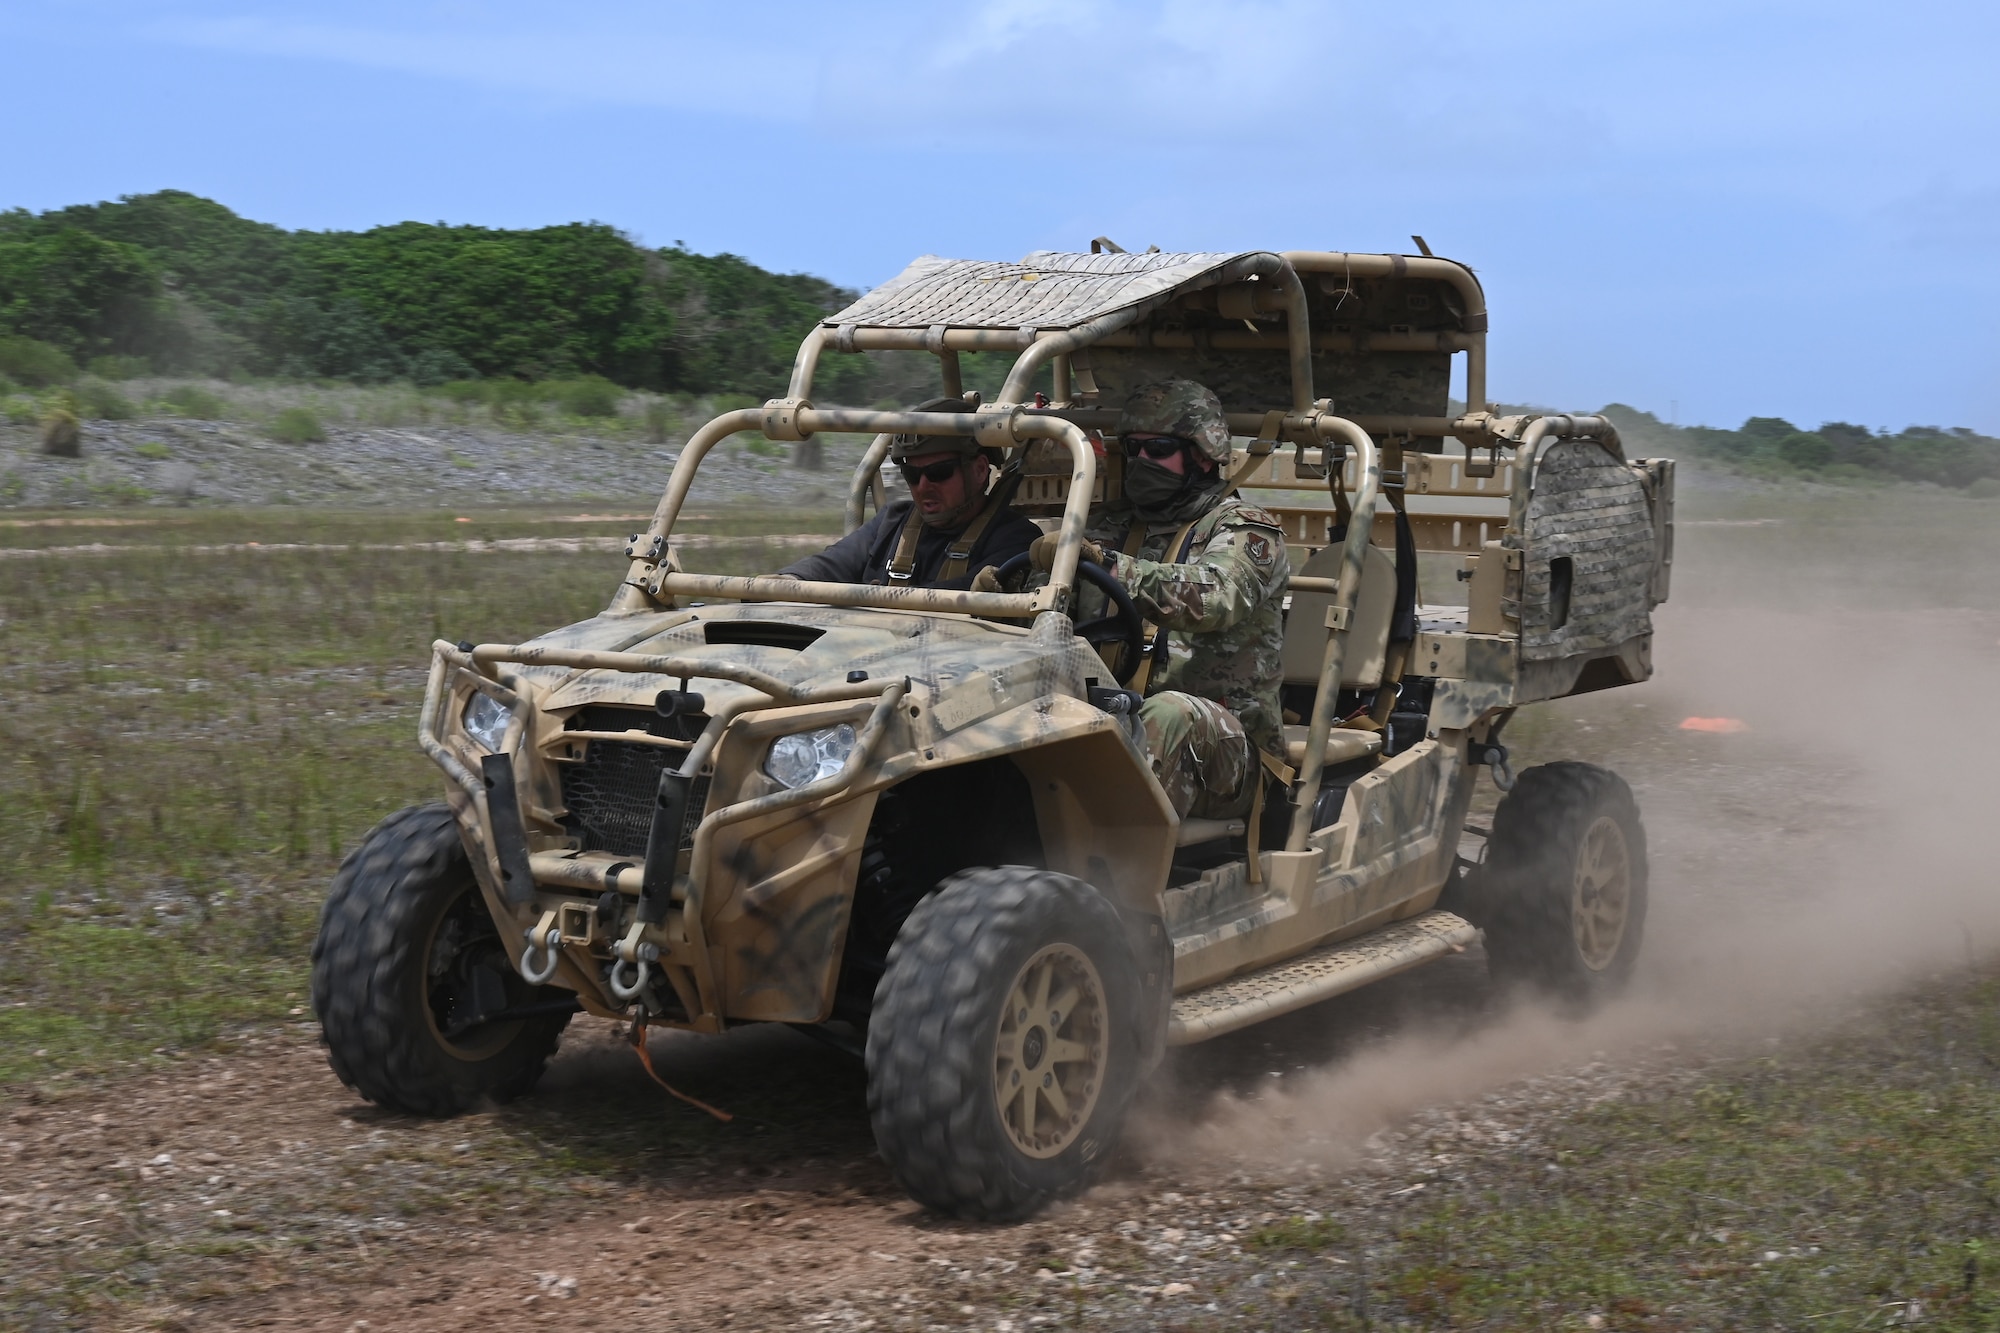 U.S. Air Force members assigned to
Andersen Air Force Base, Guam, practice
driving skills during the air advisor
course at Pacific Regional
Training Center-Andersen, Guam, April 5,
2023.